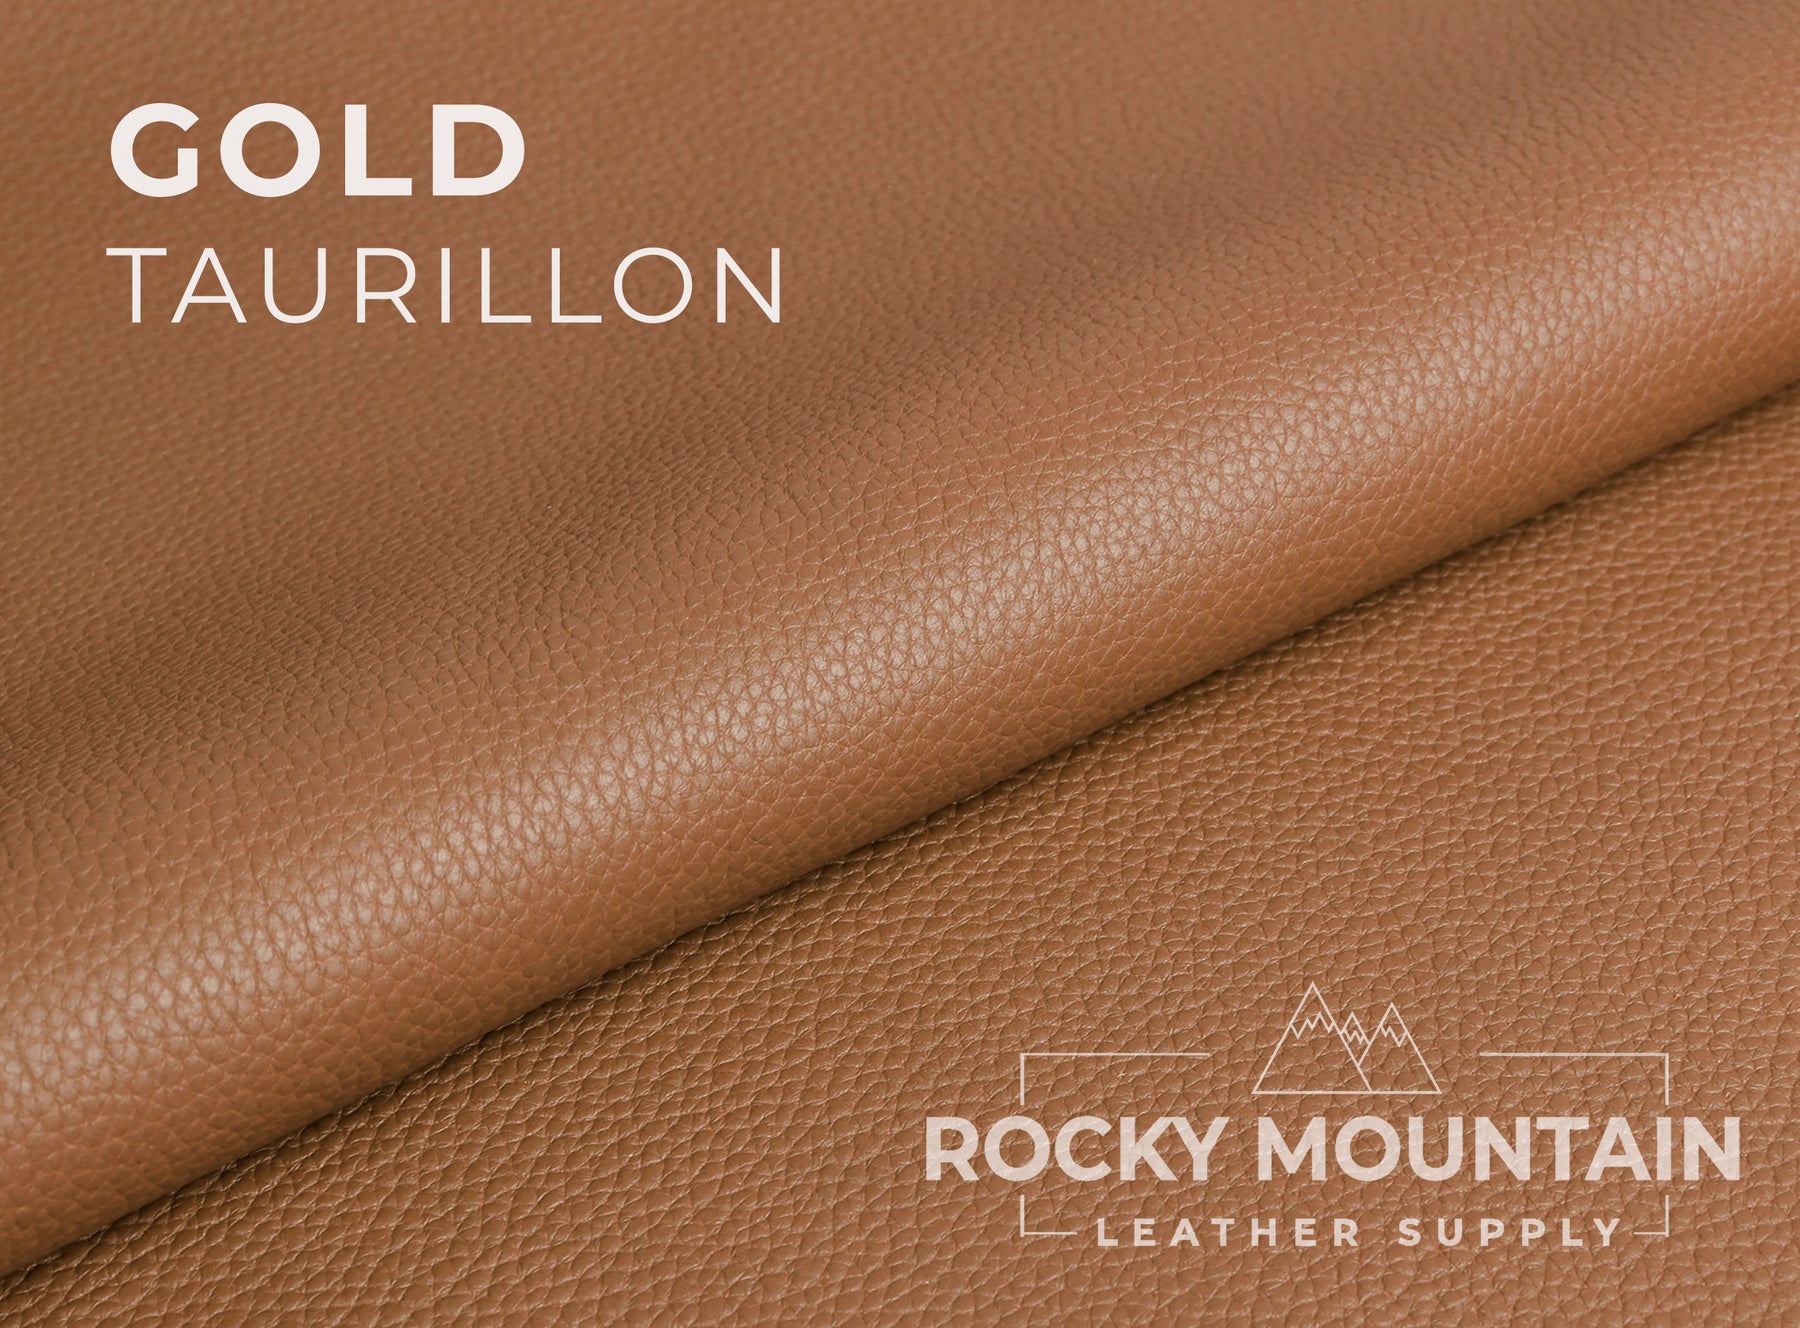 Taurillon - Luxury Handbag Large Pebbled Young Bull Leather (HIDES) Raisin - Full Hide - 2XL (24-26 Sqft) by Rocky Mountain Leather Supply